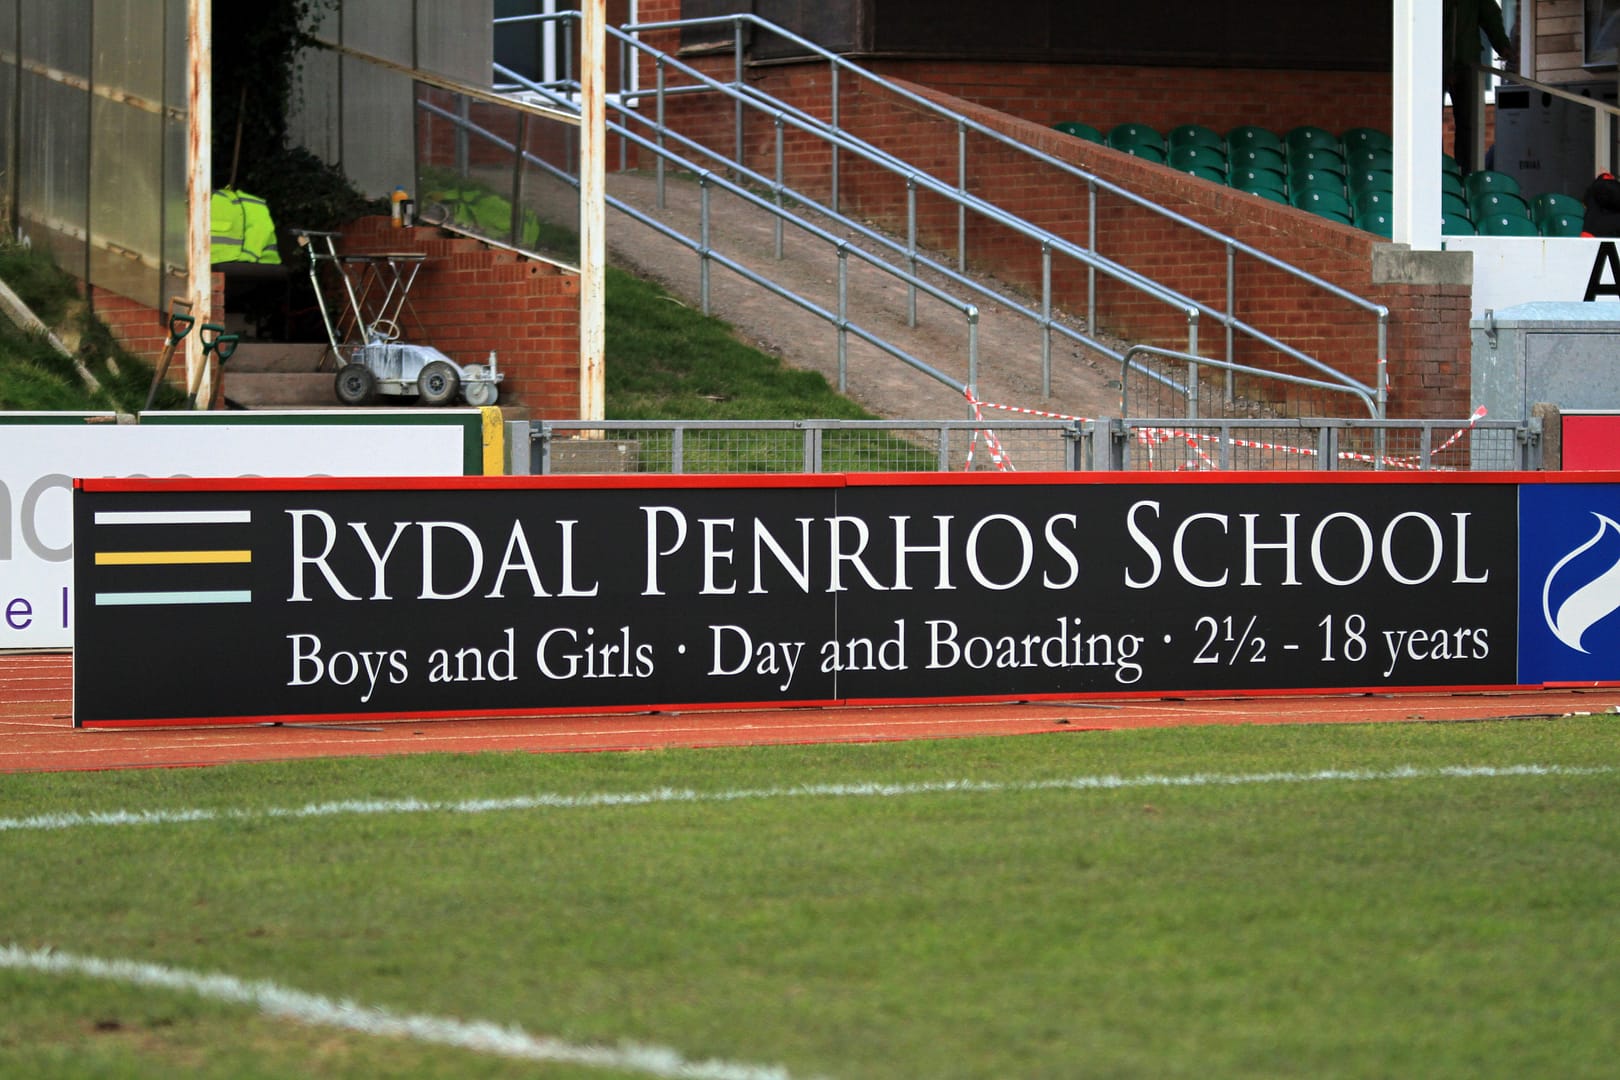 Hoardings in situ at pitch side advertising an independent school